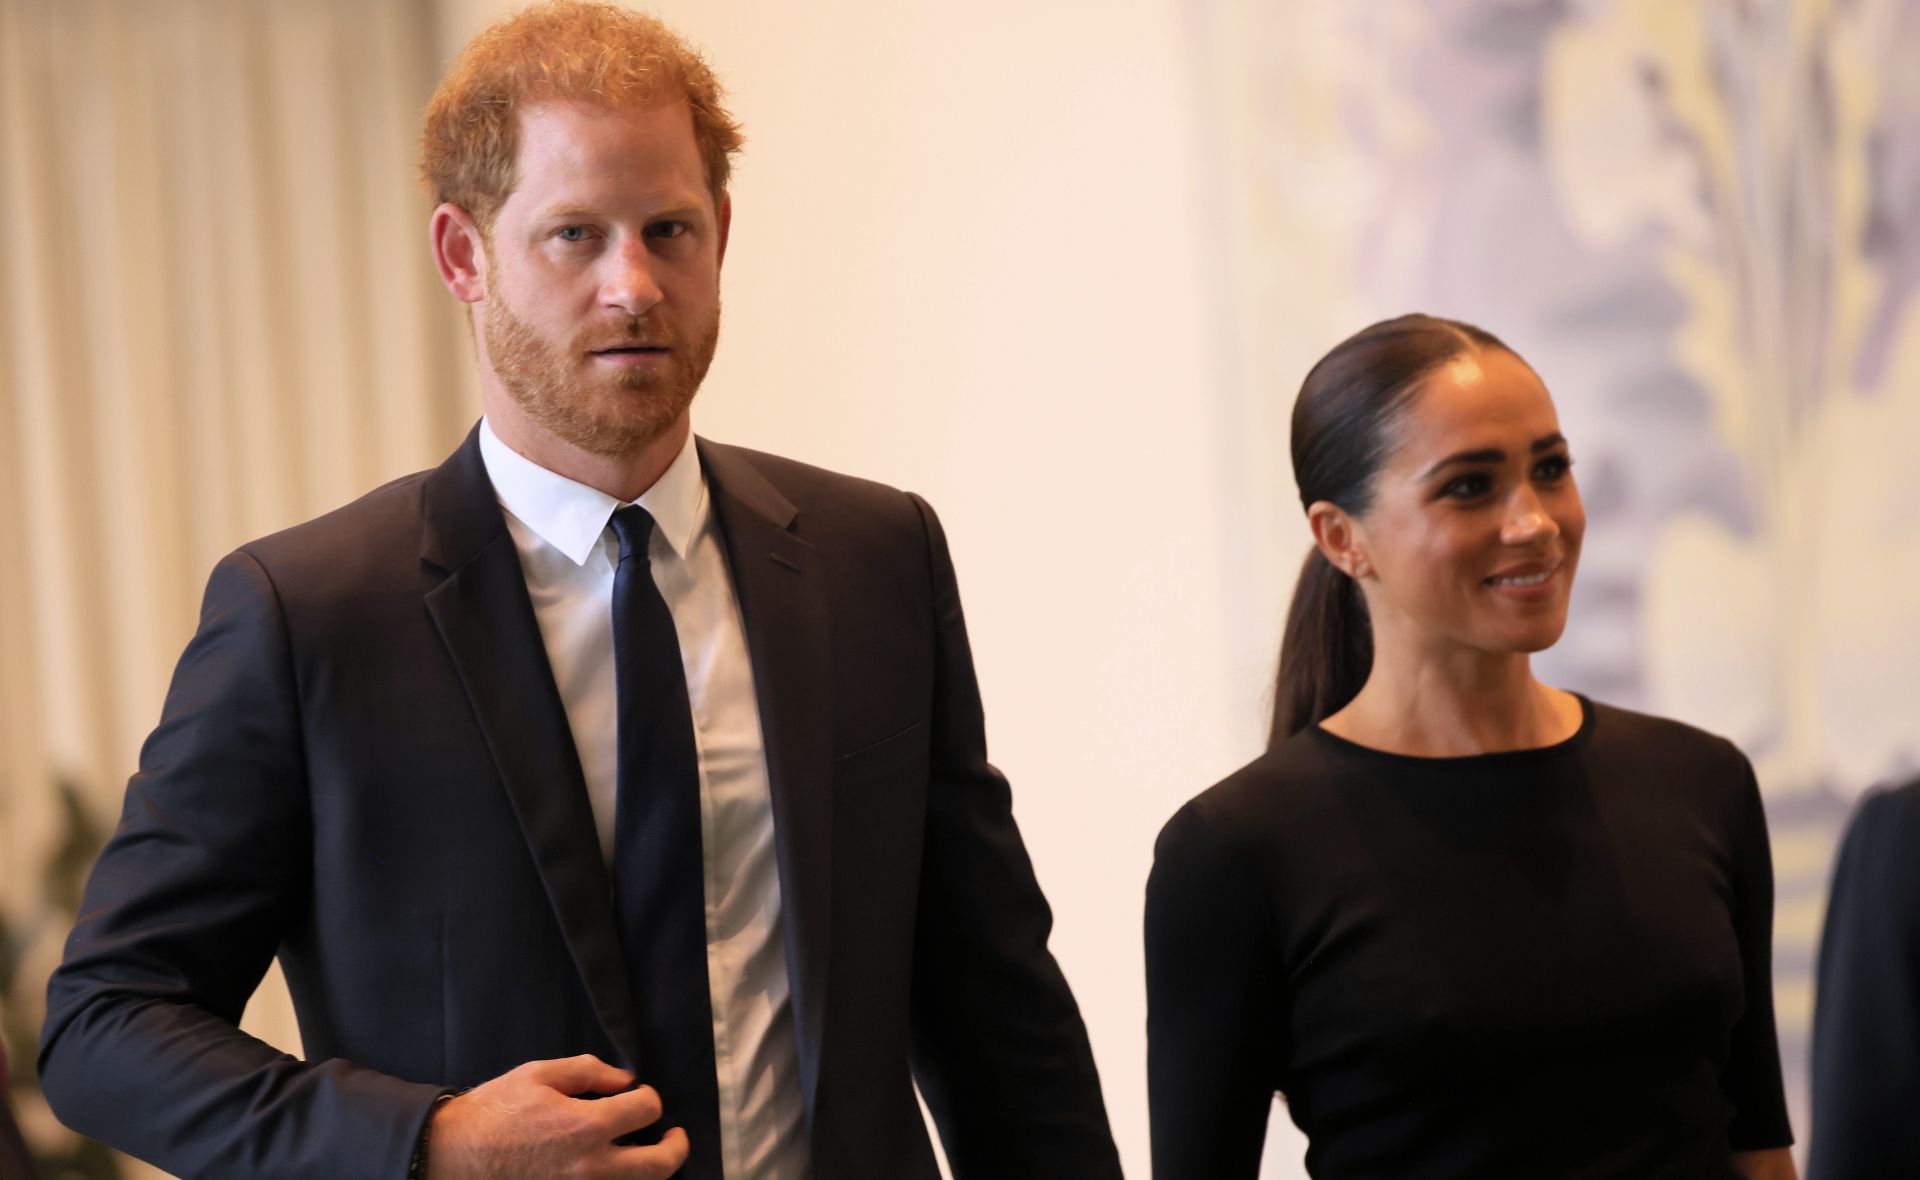 EXCLUSIVE: Prince Harry is reportedly concerned about the impacts of Meghan Markle’s new podcast on their family